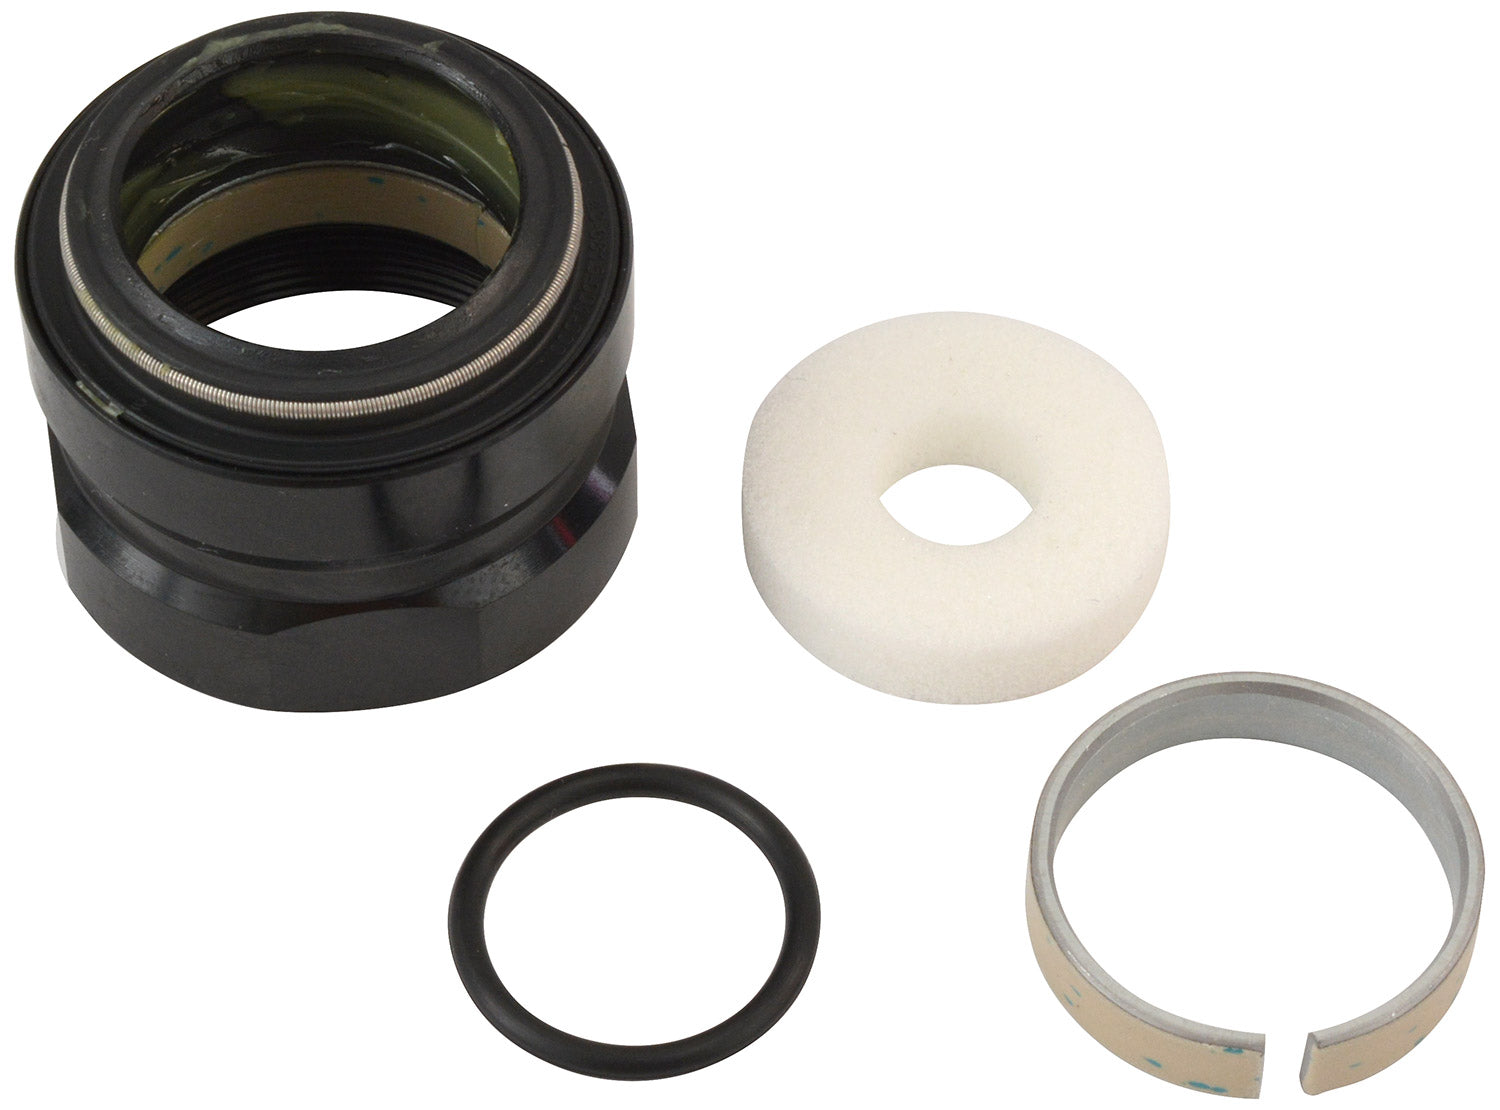 ROCKSHOX SPARE - REVERB SERVICE KIT - 200 HOUR/1 YEAR SERVICE (INCLUDES FOAM RING, COLLAR, INNER SEALHEAD BUSHING, & O-RING) - REVERB STEALTH C1